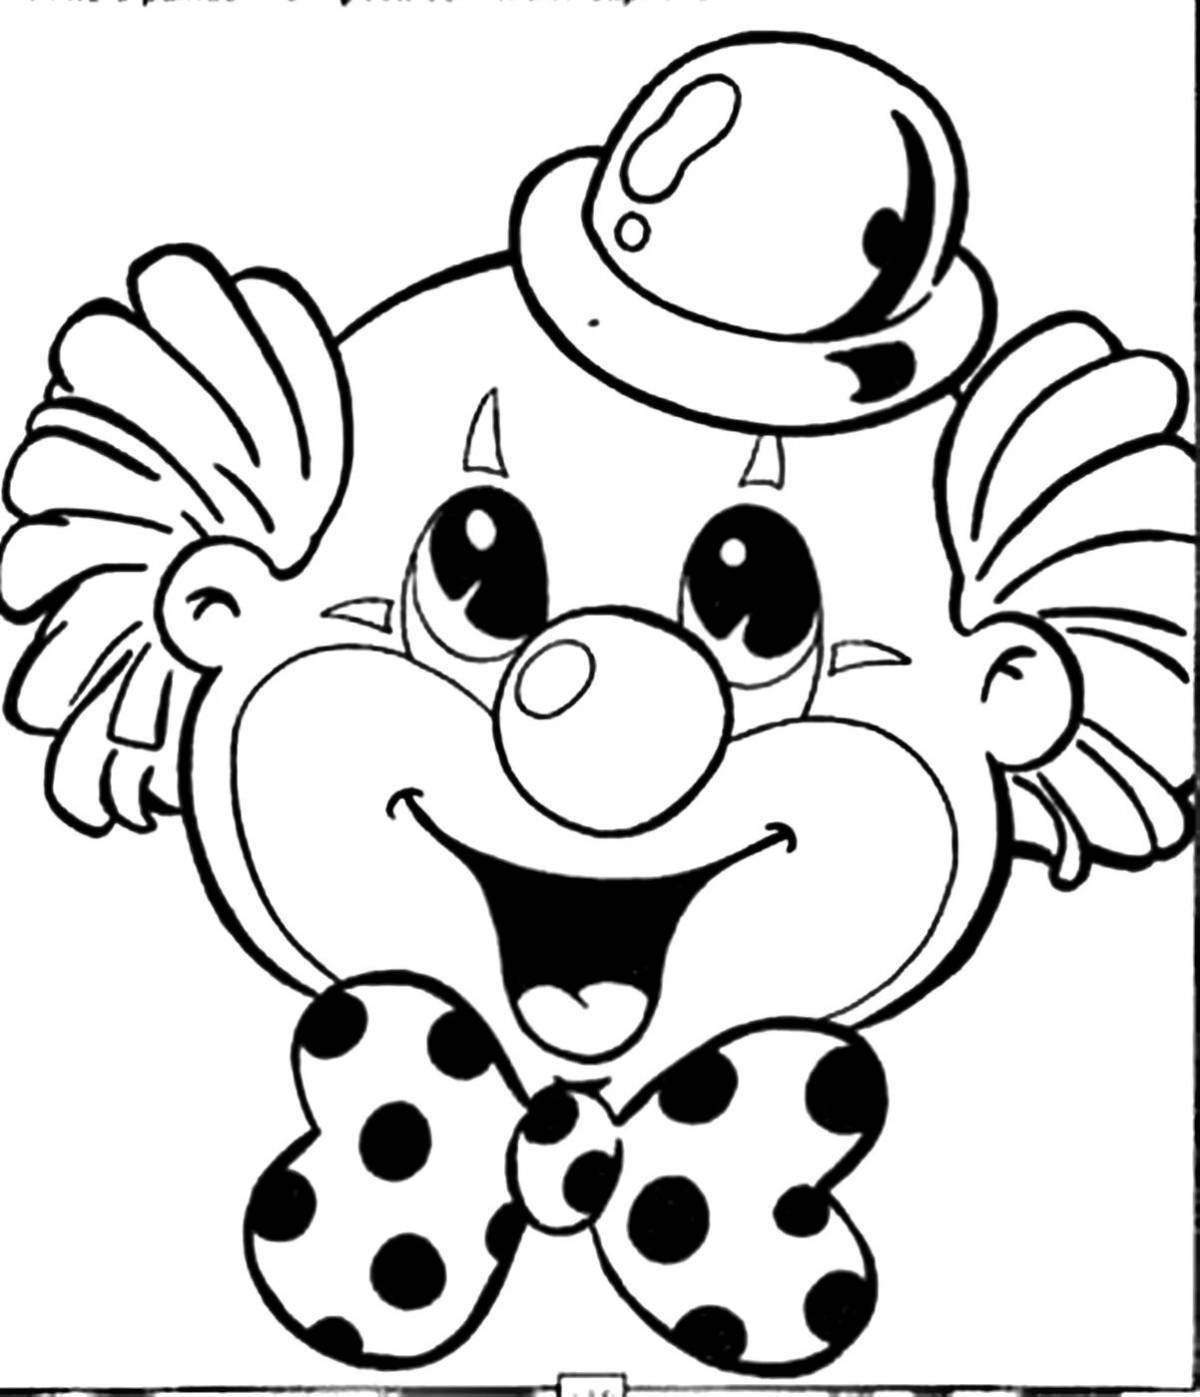 Humorous clown face coloring page